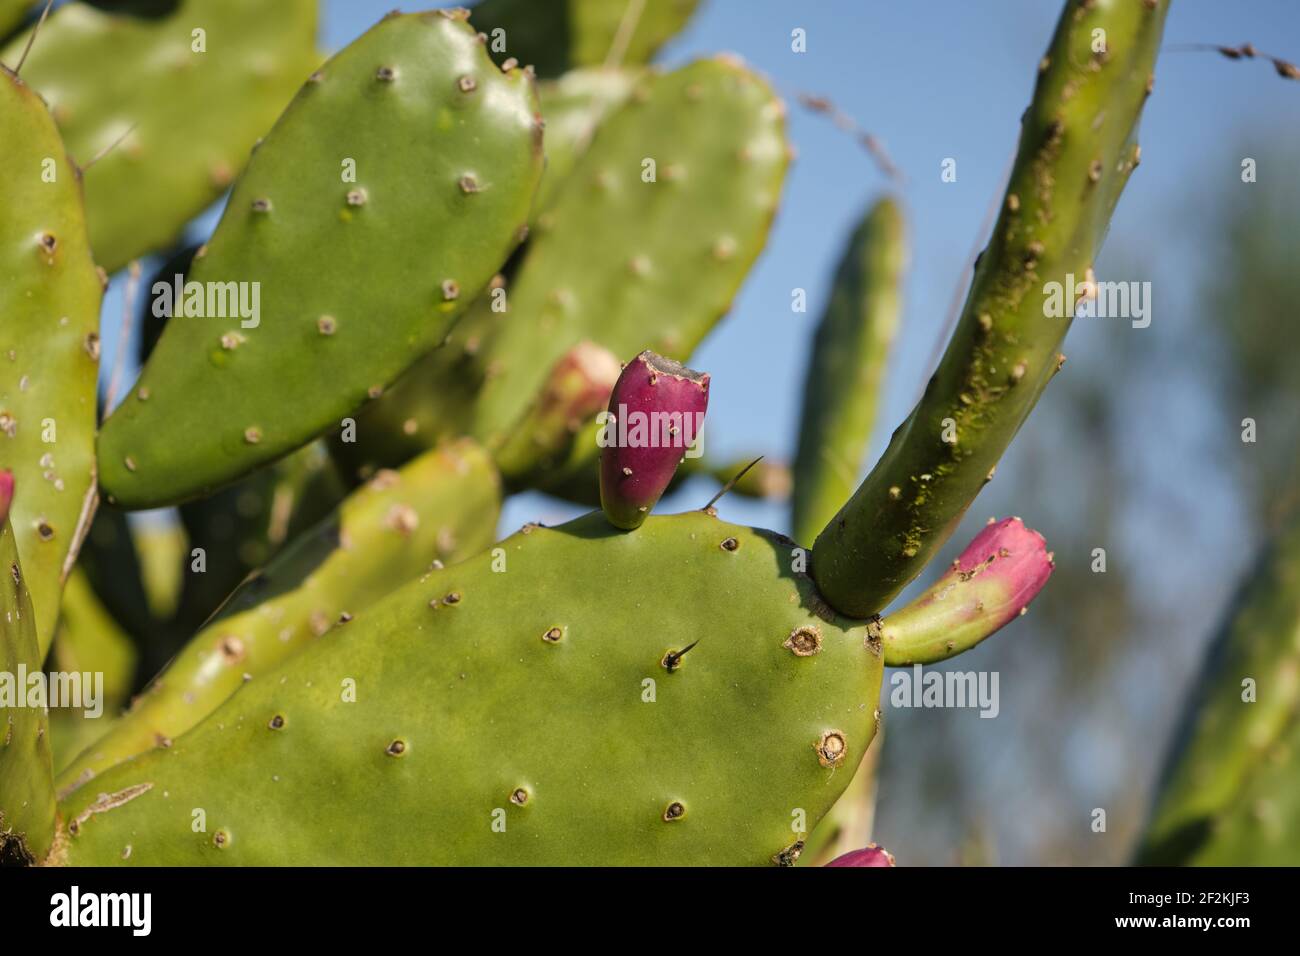 Detail of opuntia ficus indica or prickly pear with fruits Stock Photo